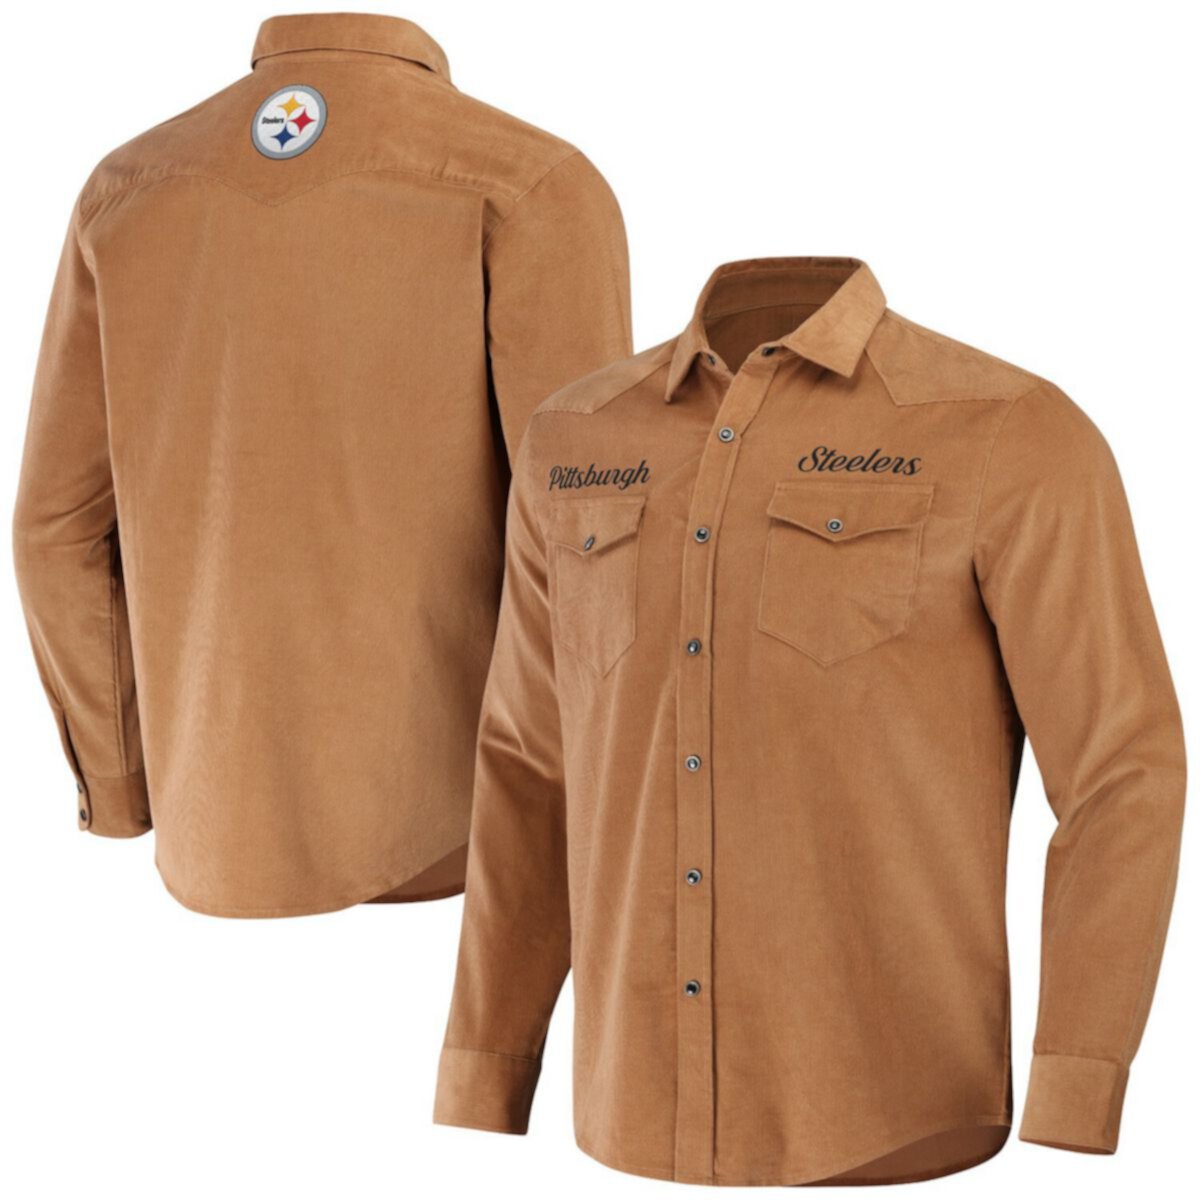 Men's NFL x Darius Rucker Collection by Fanatics Tan Pittsburgh Steelers Western Full-Snap Shirt NFL x Darius Rucker Collection by Fanatics